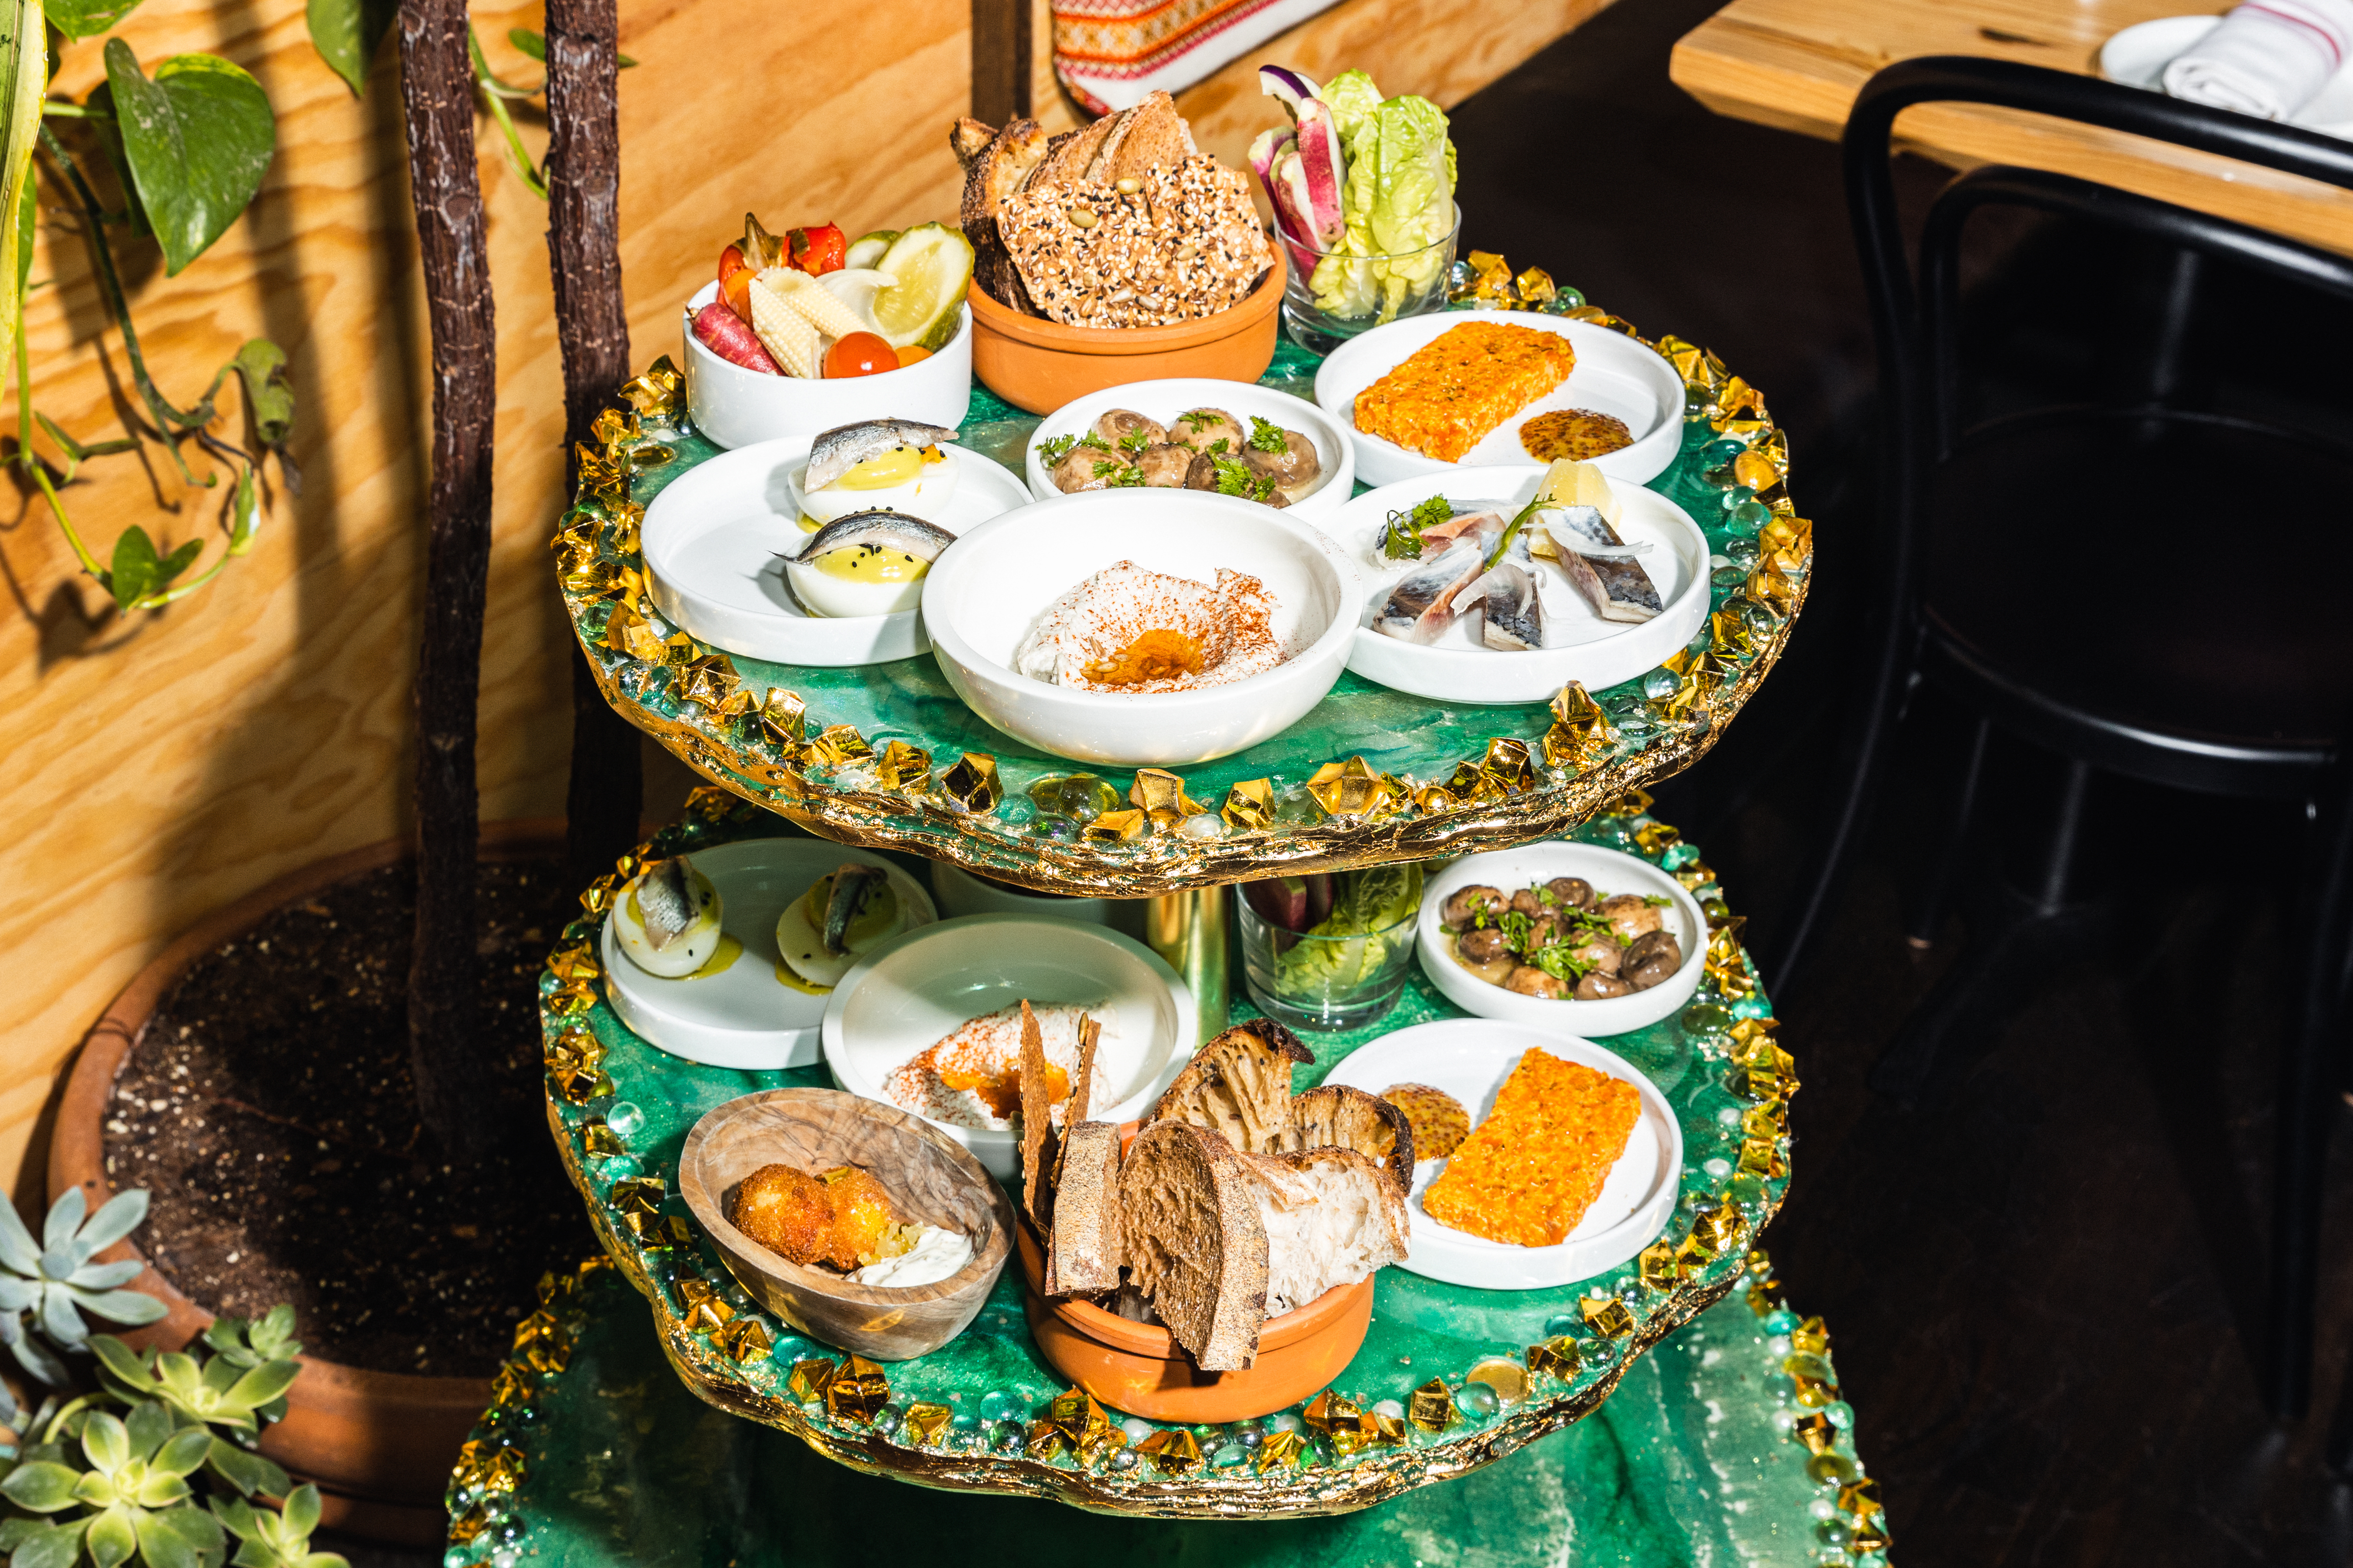 A tiered tray of small Ukrainian dishes.